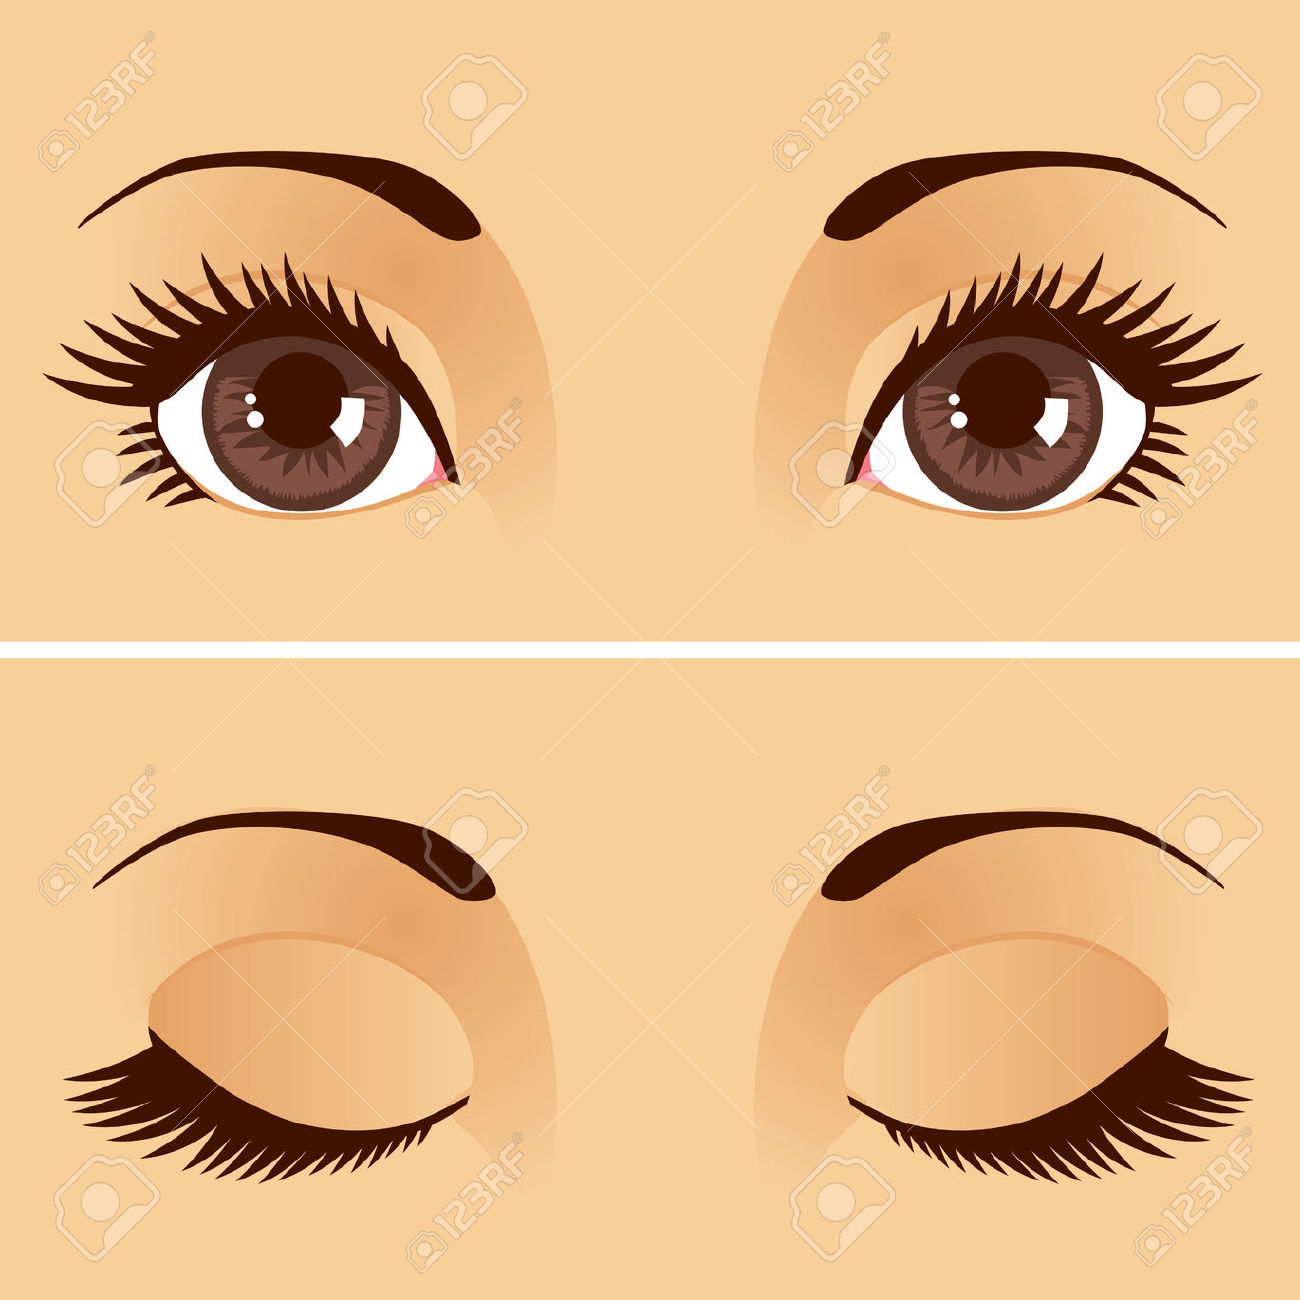 Close eyes clipart.